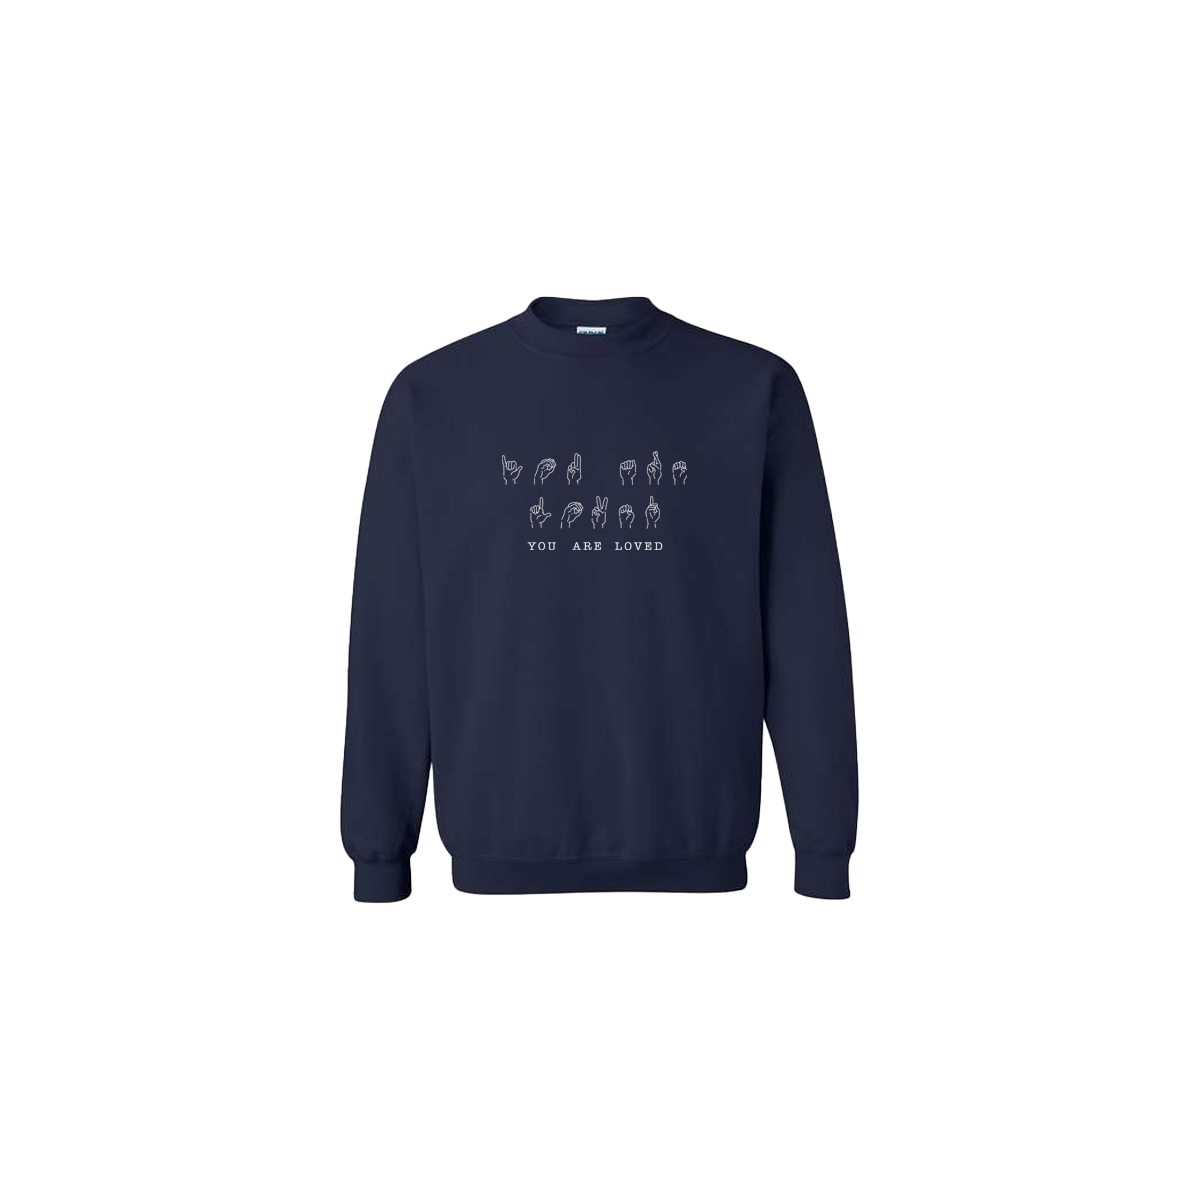 You Are Loved Sign Language Embroidered Navy Blue Crewneck - Mental Health Awareness Clothing